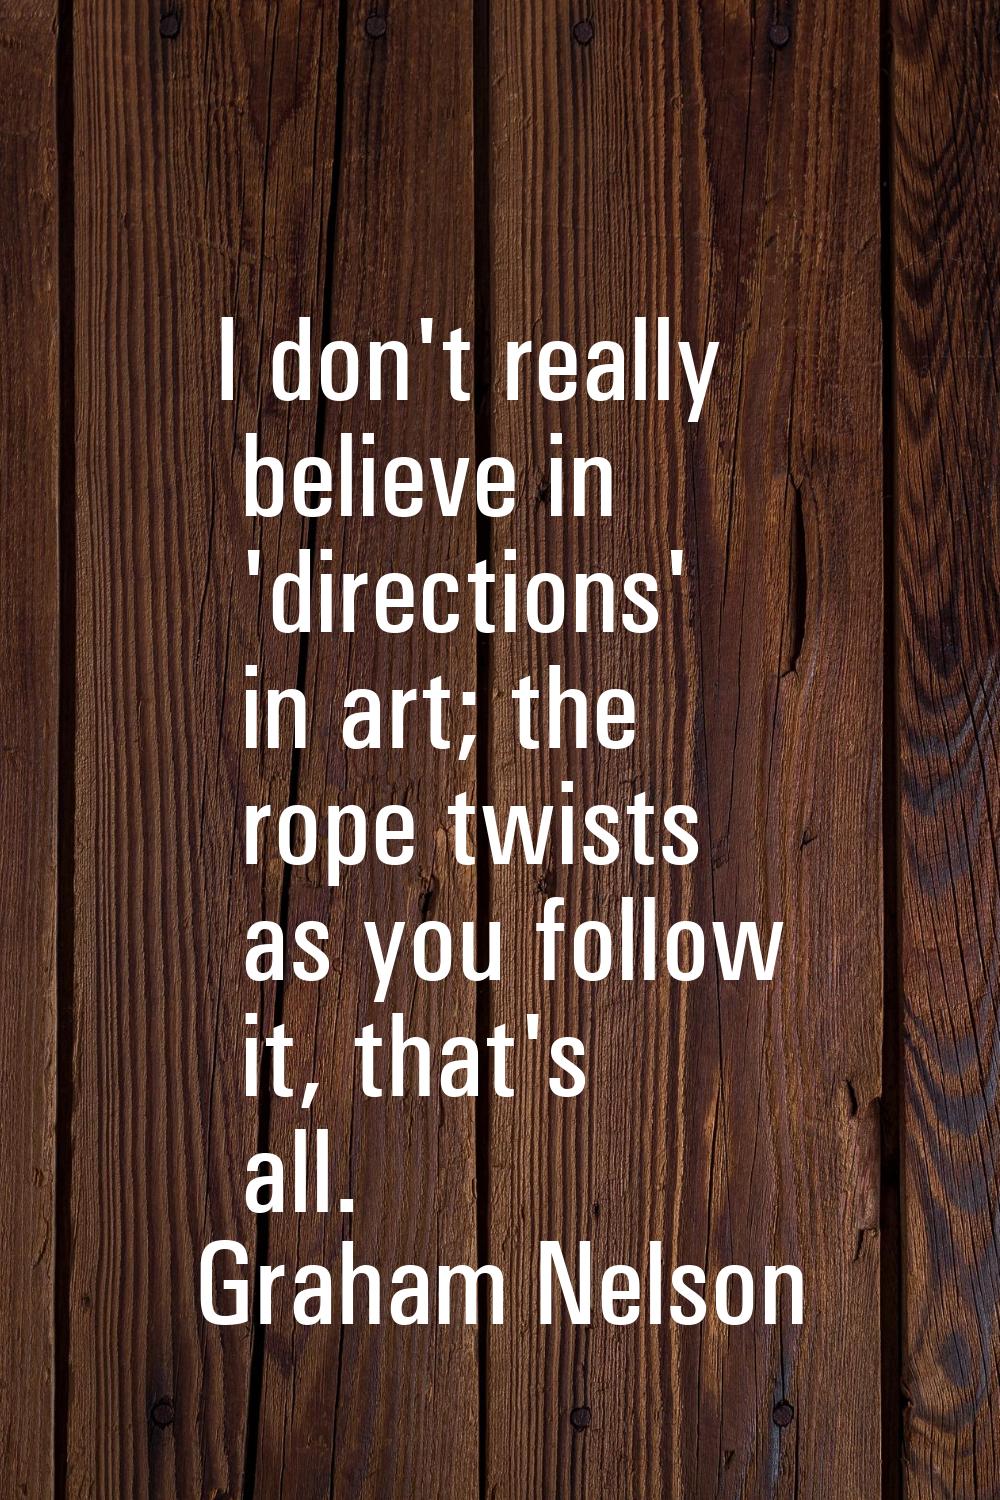 I don't really believe in 'directions' in art; the rope twists as you follow it, that's all.